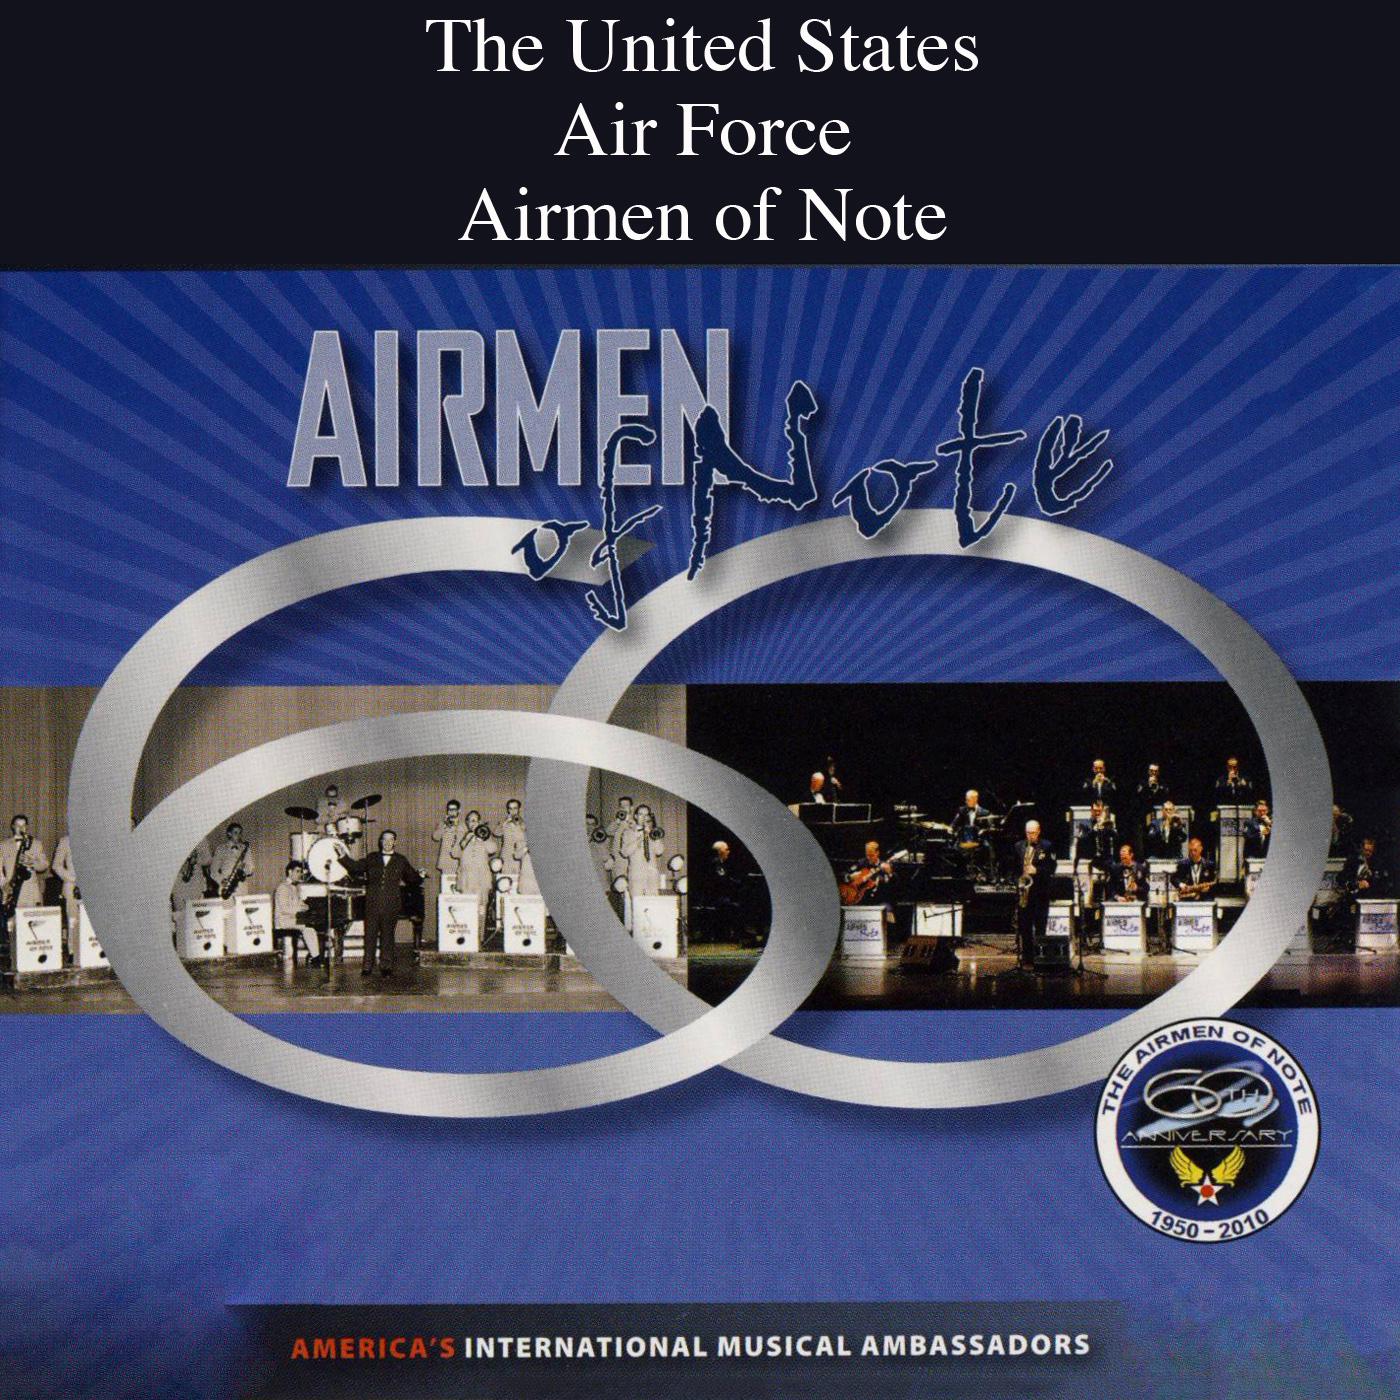 United States Air Force Band - Airmen of Note - Uno mas